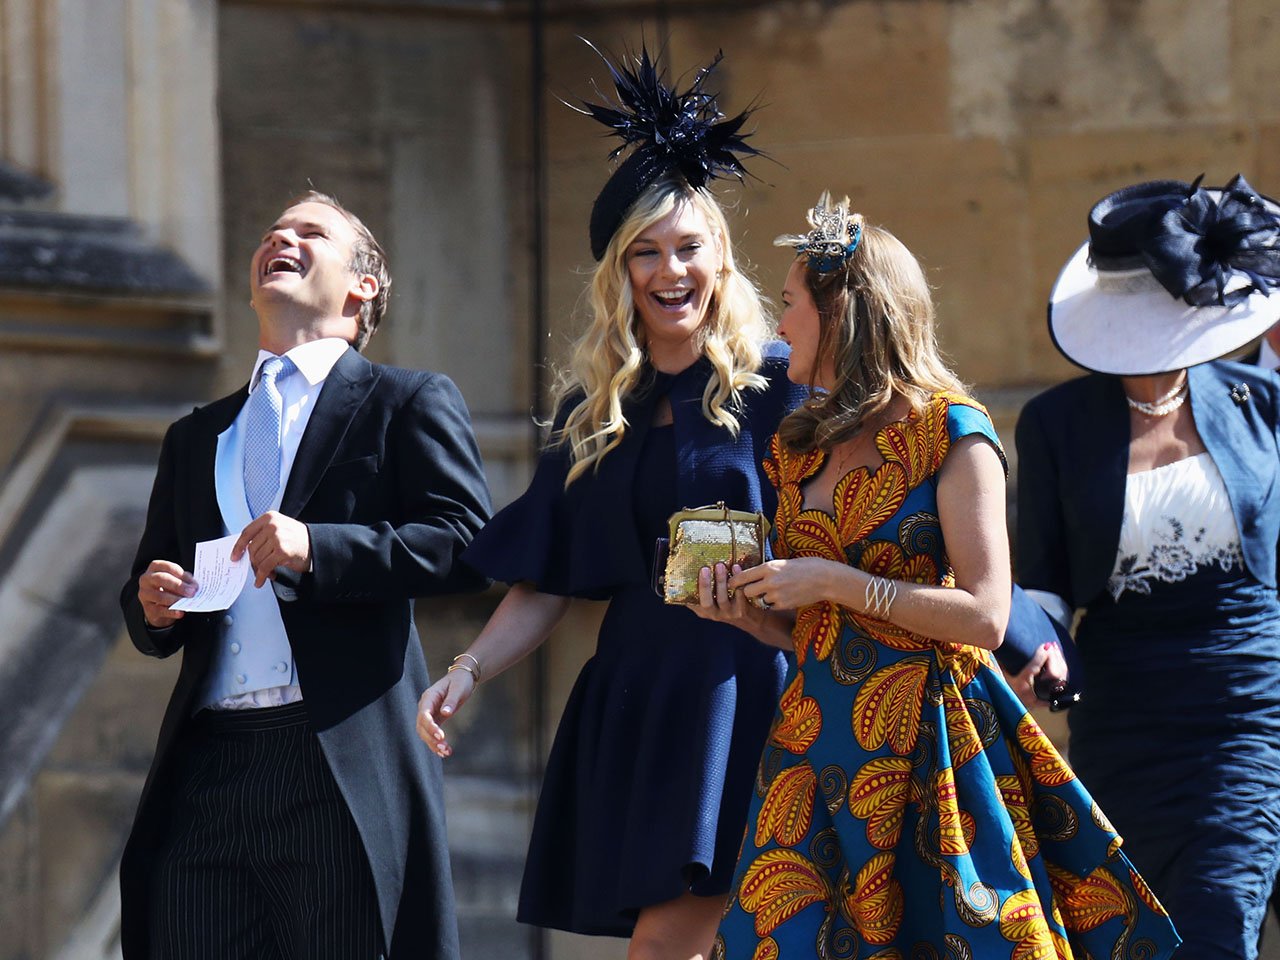 Chelsy Davy arrives at the royal wedding of Prince Harry to Ms Meghan Markle at St George's Chapel, Windsor Castle